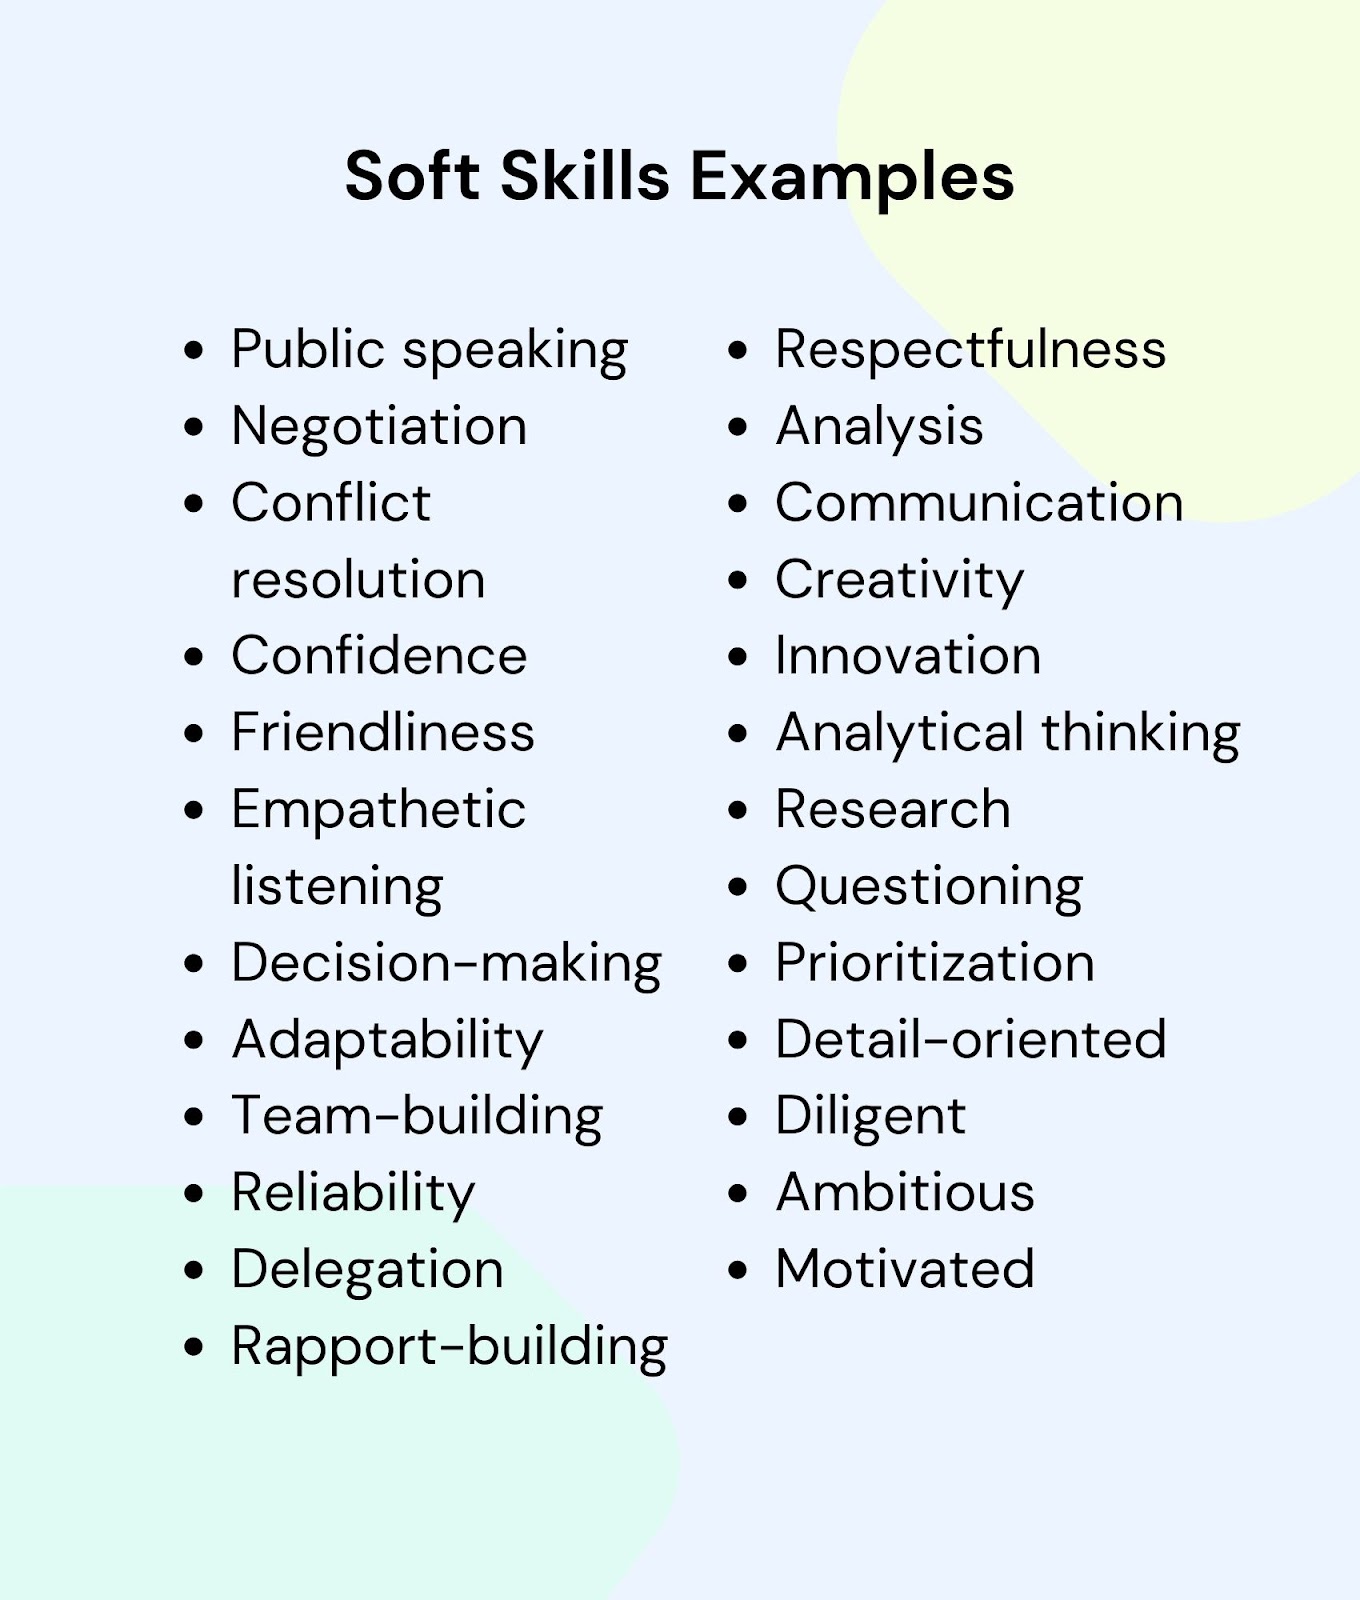 soft skills for research analyst